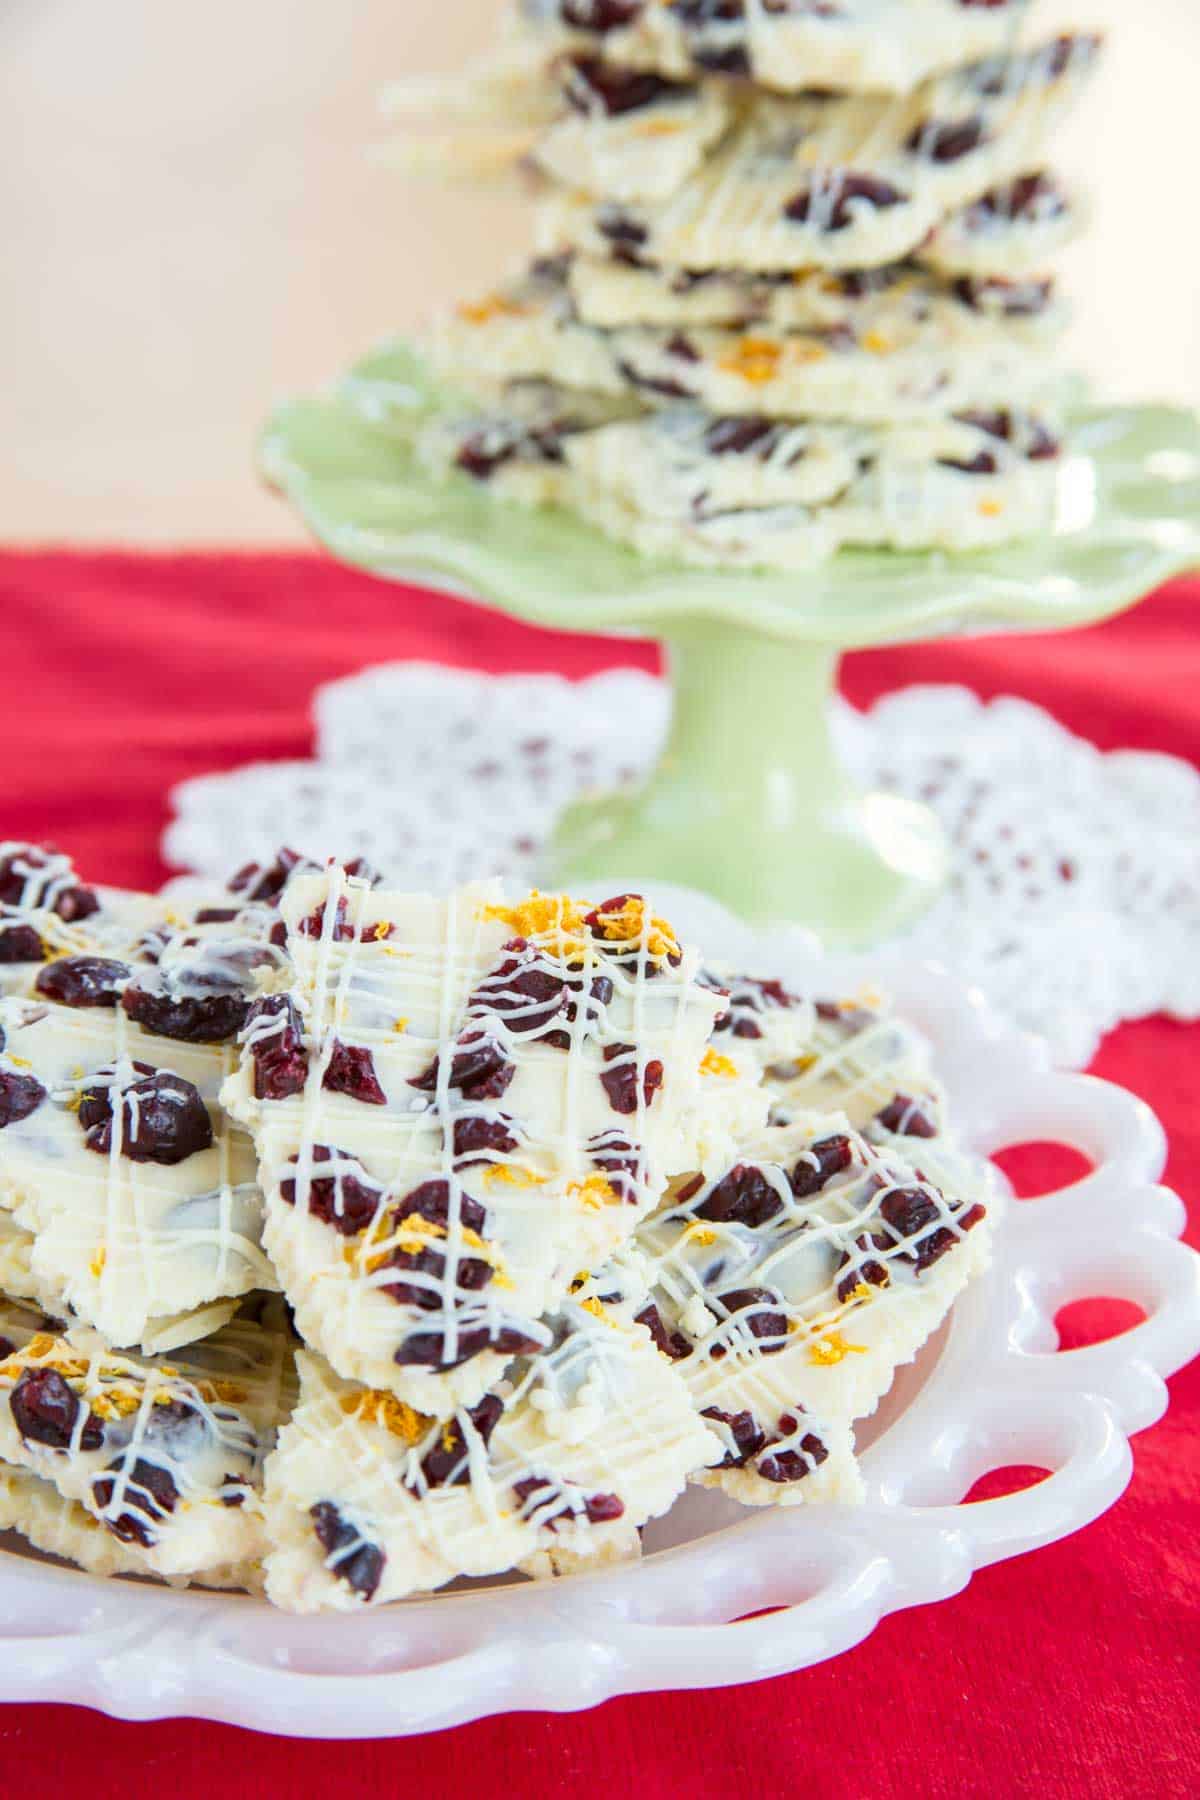 white chocolate bark with dried cranberries piled on a plate and a cake stand set on a red tablecloth.